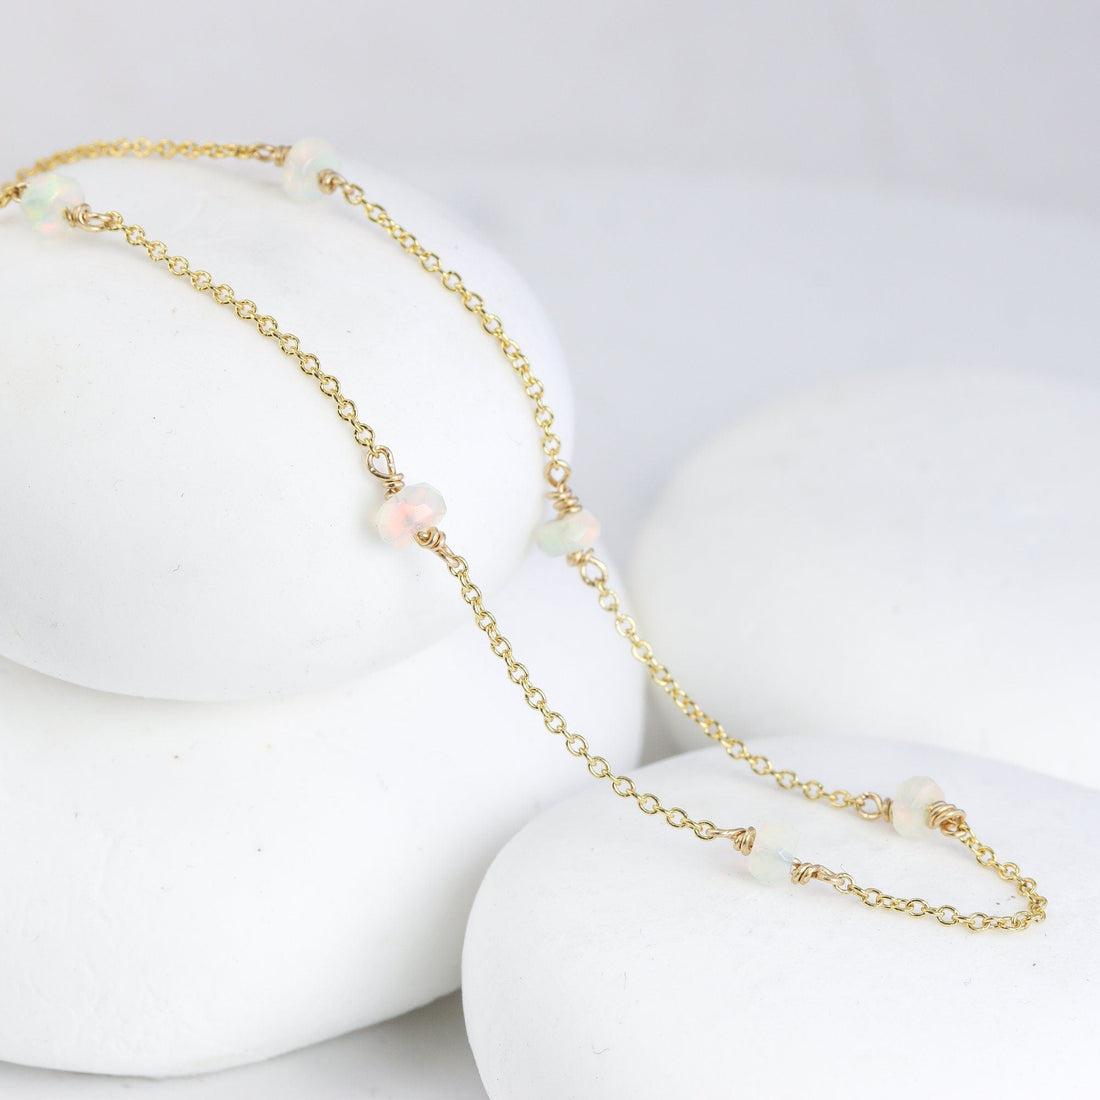 Floating White Opal Necklace with tiny Genuine Opal Stones